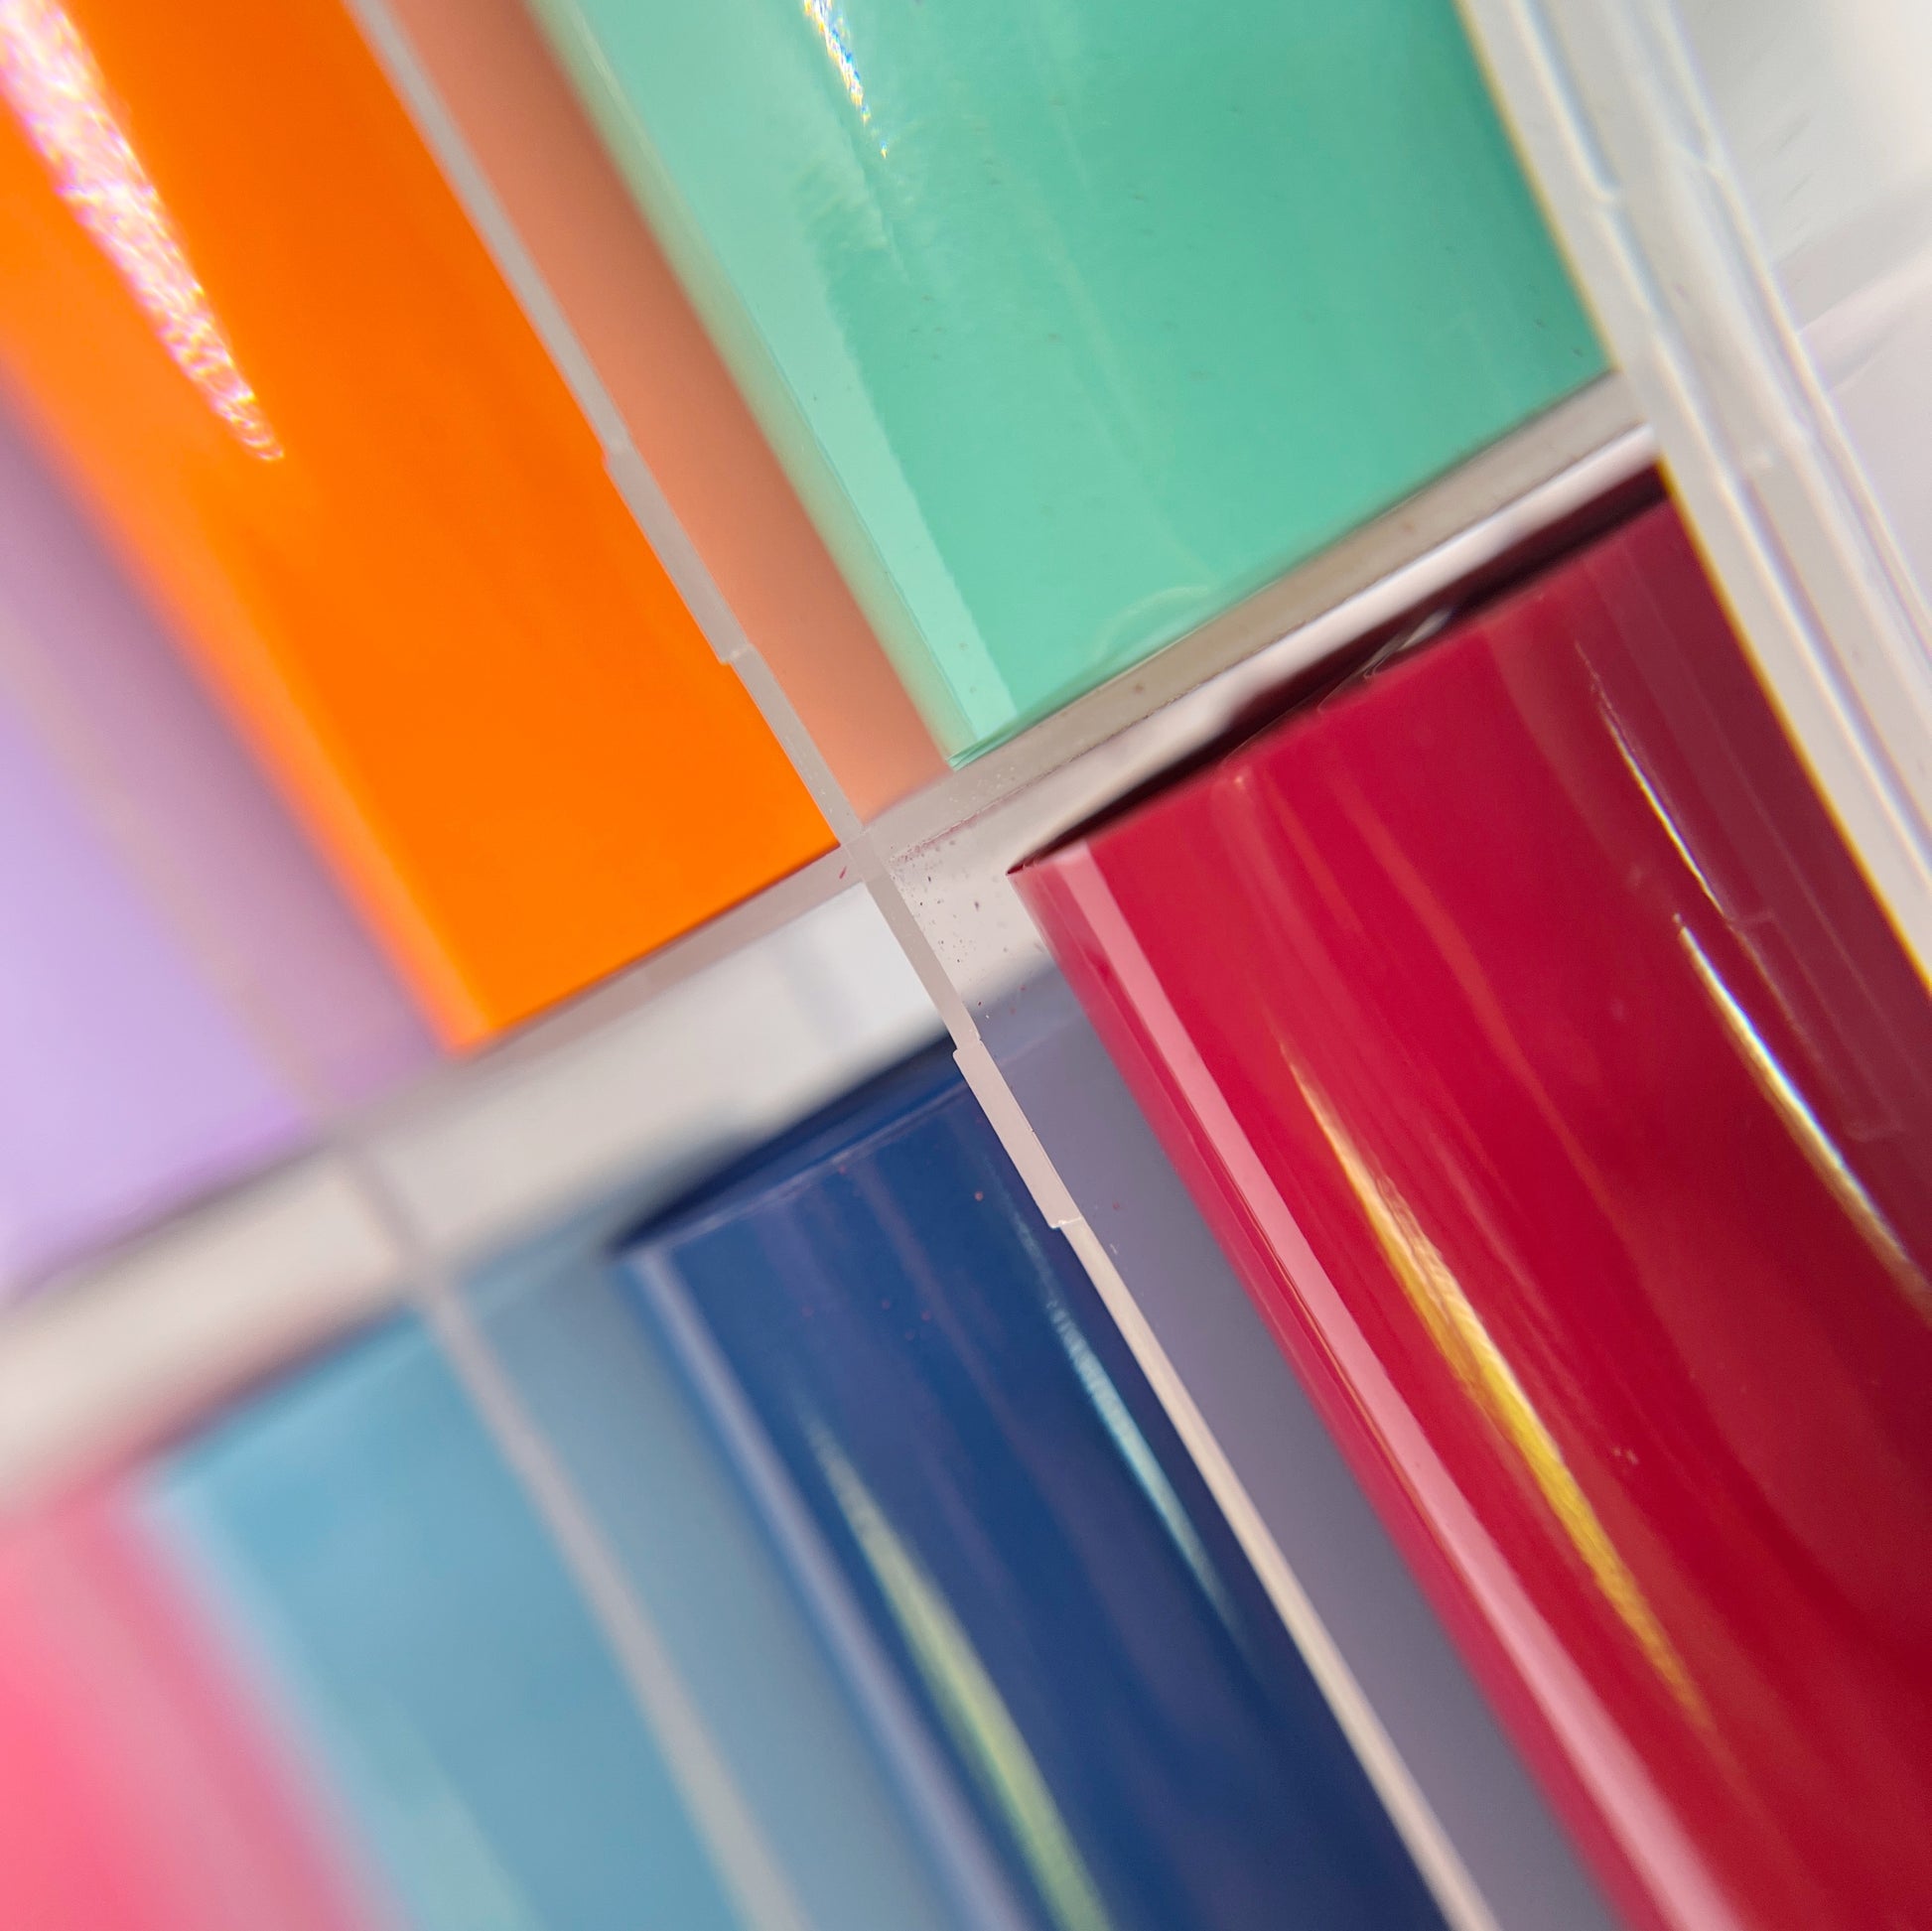 Close-Up of Solid Gloss Foil Set - Detailed View of 10 Solid Glossy (Non-Metallic) Foils in Various Vibrant Colors.